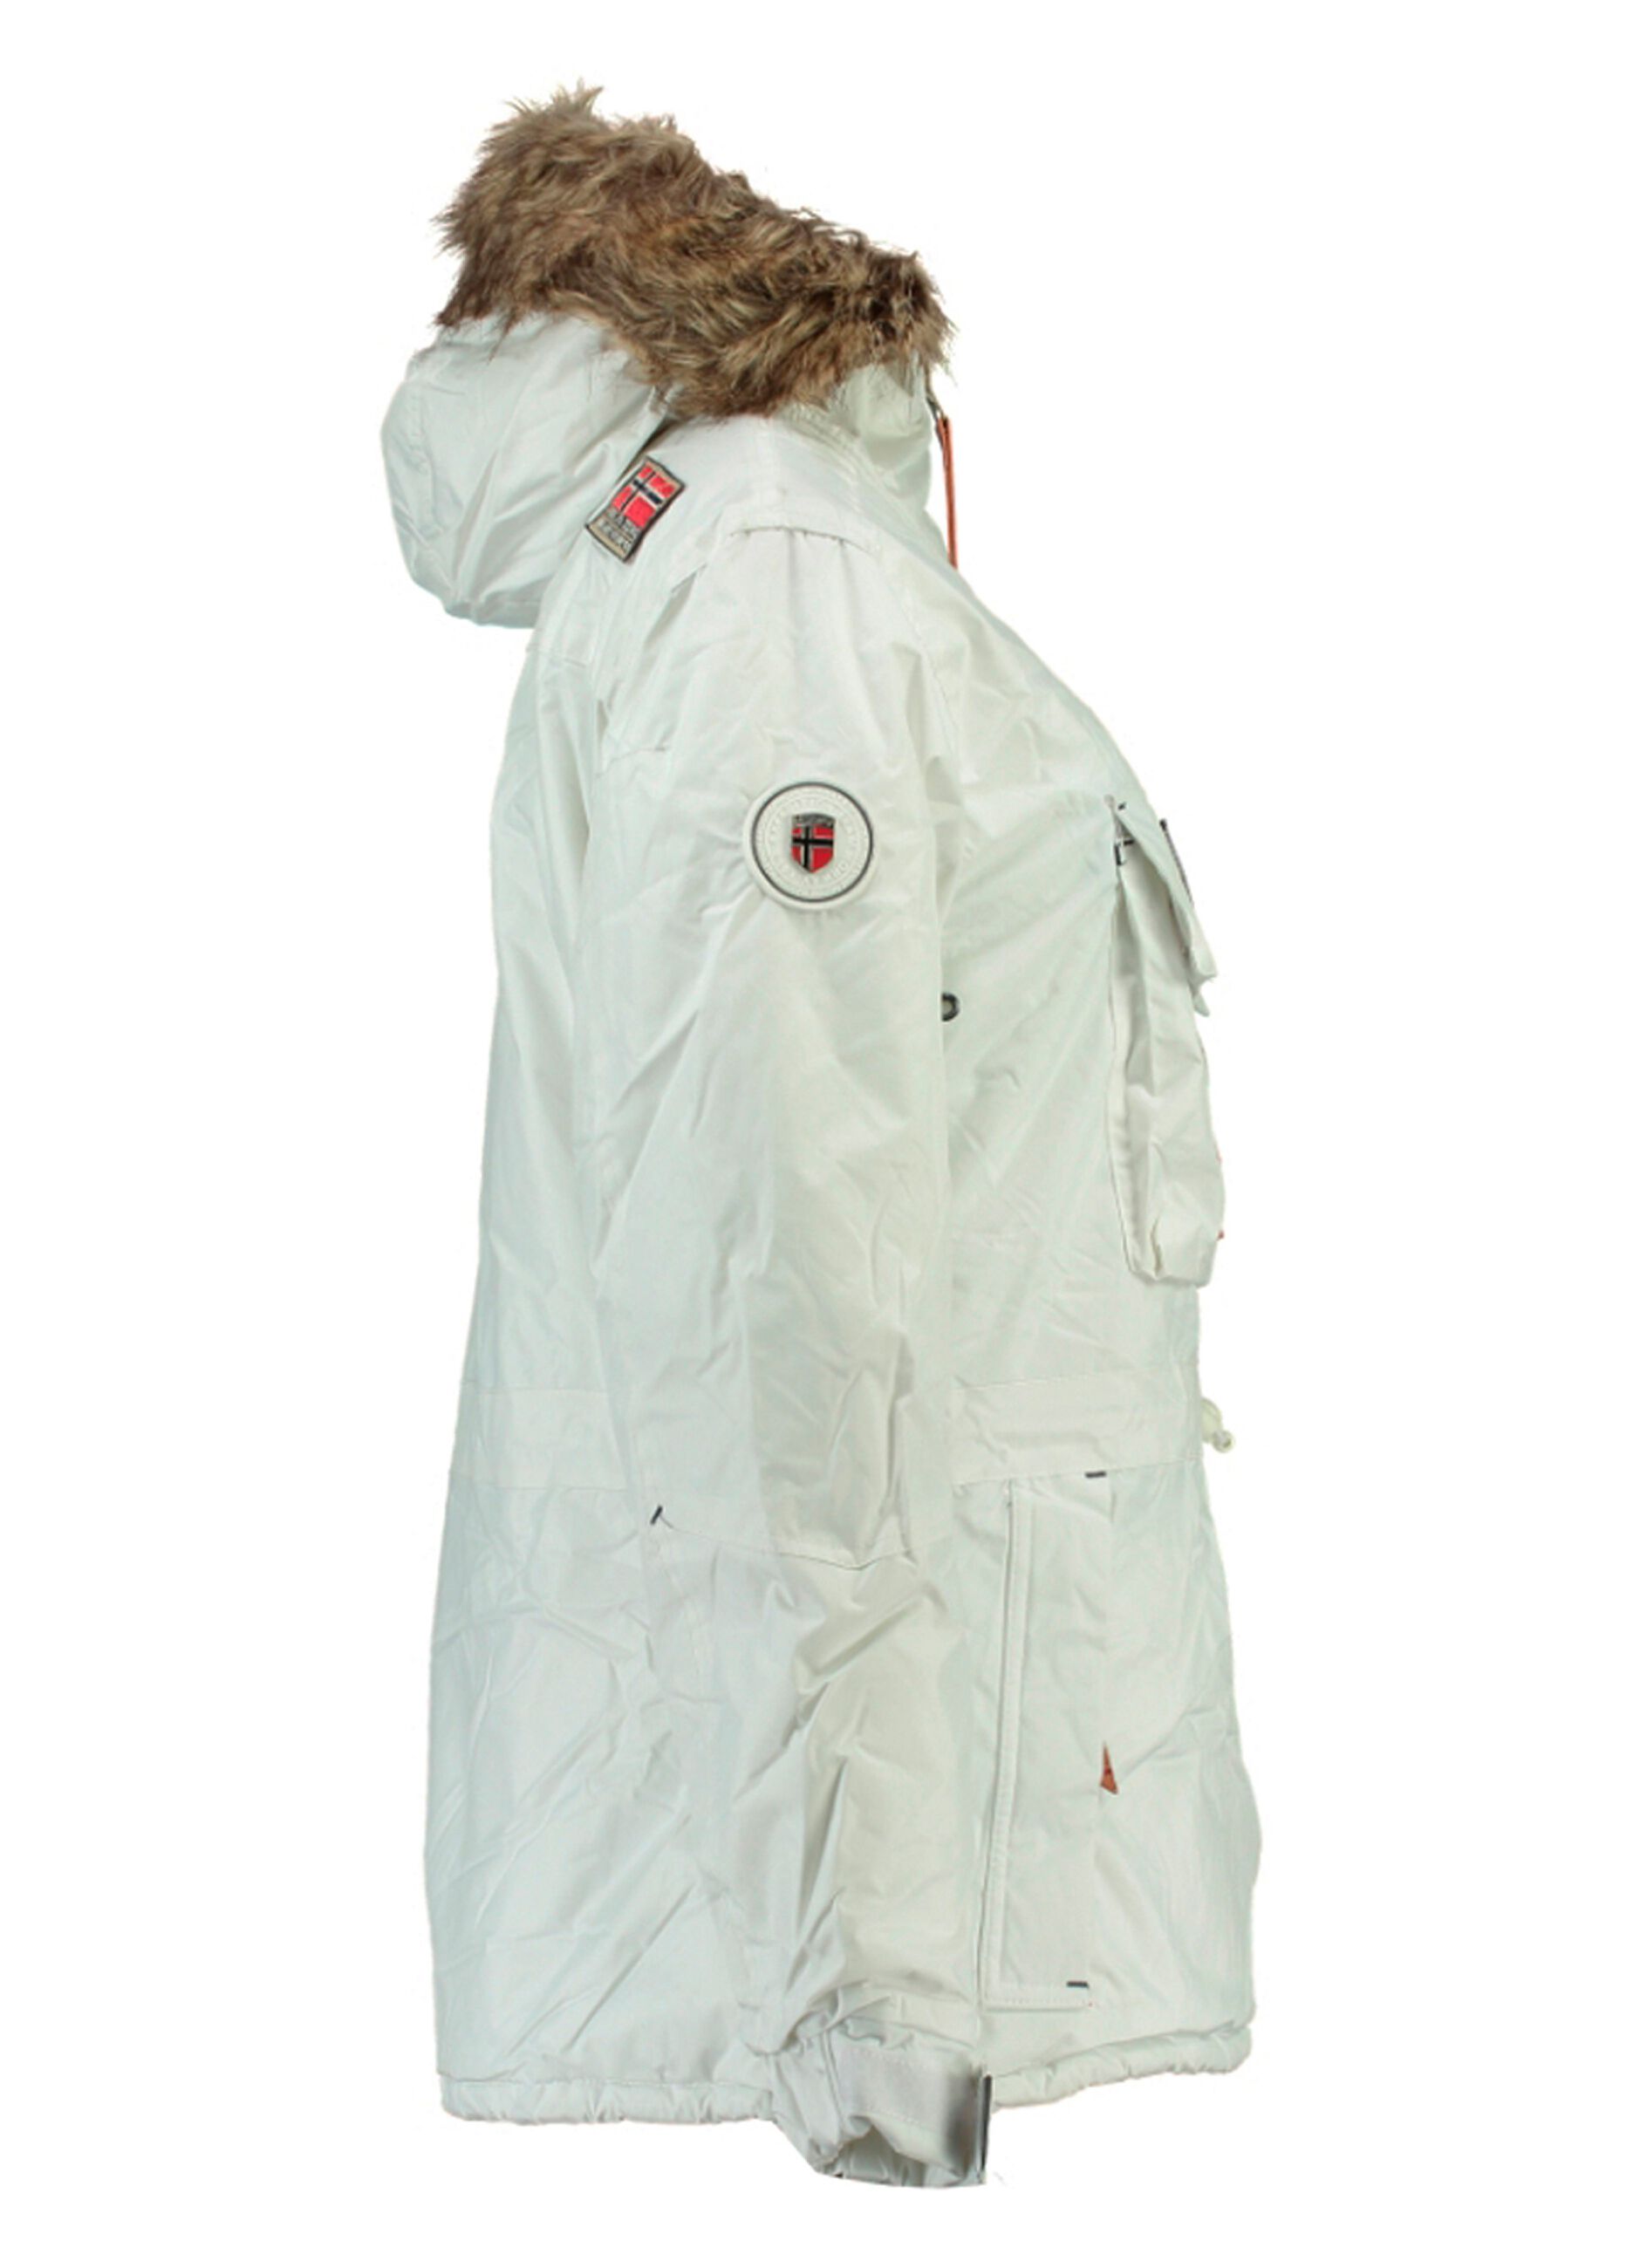 Parka acolchada con capucha Geographical Norway